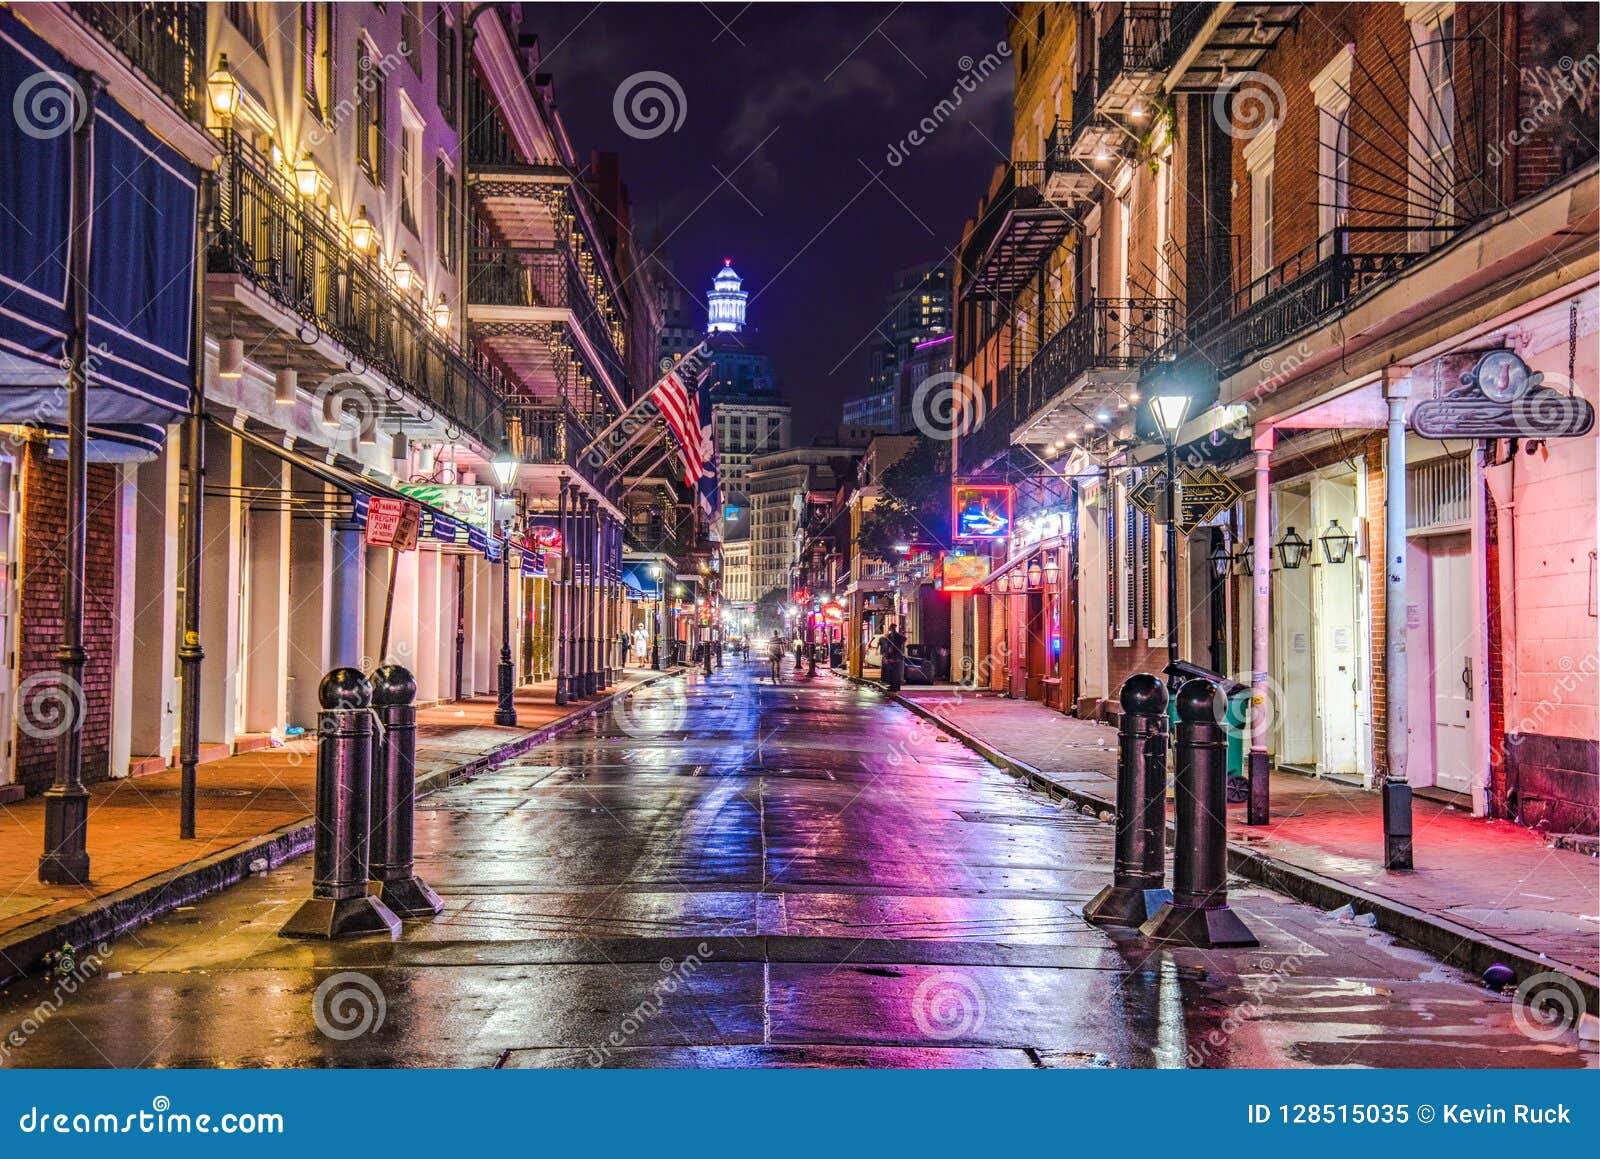 bourbon street in downtown new orleans, louisiana, usa